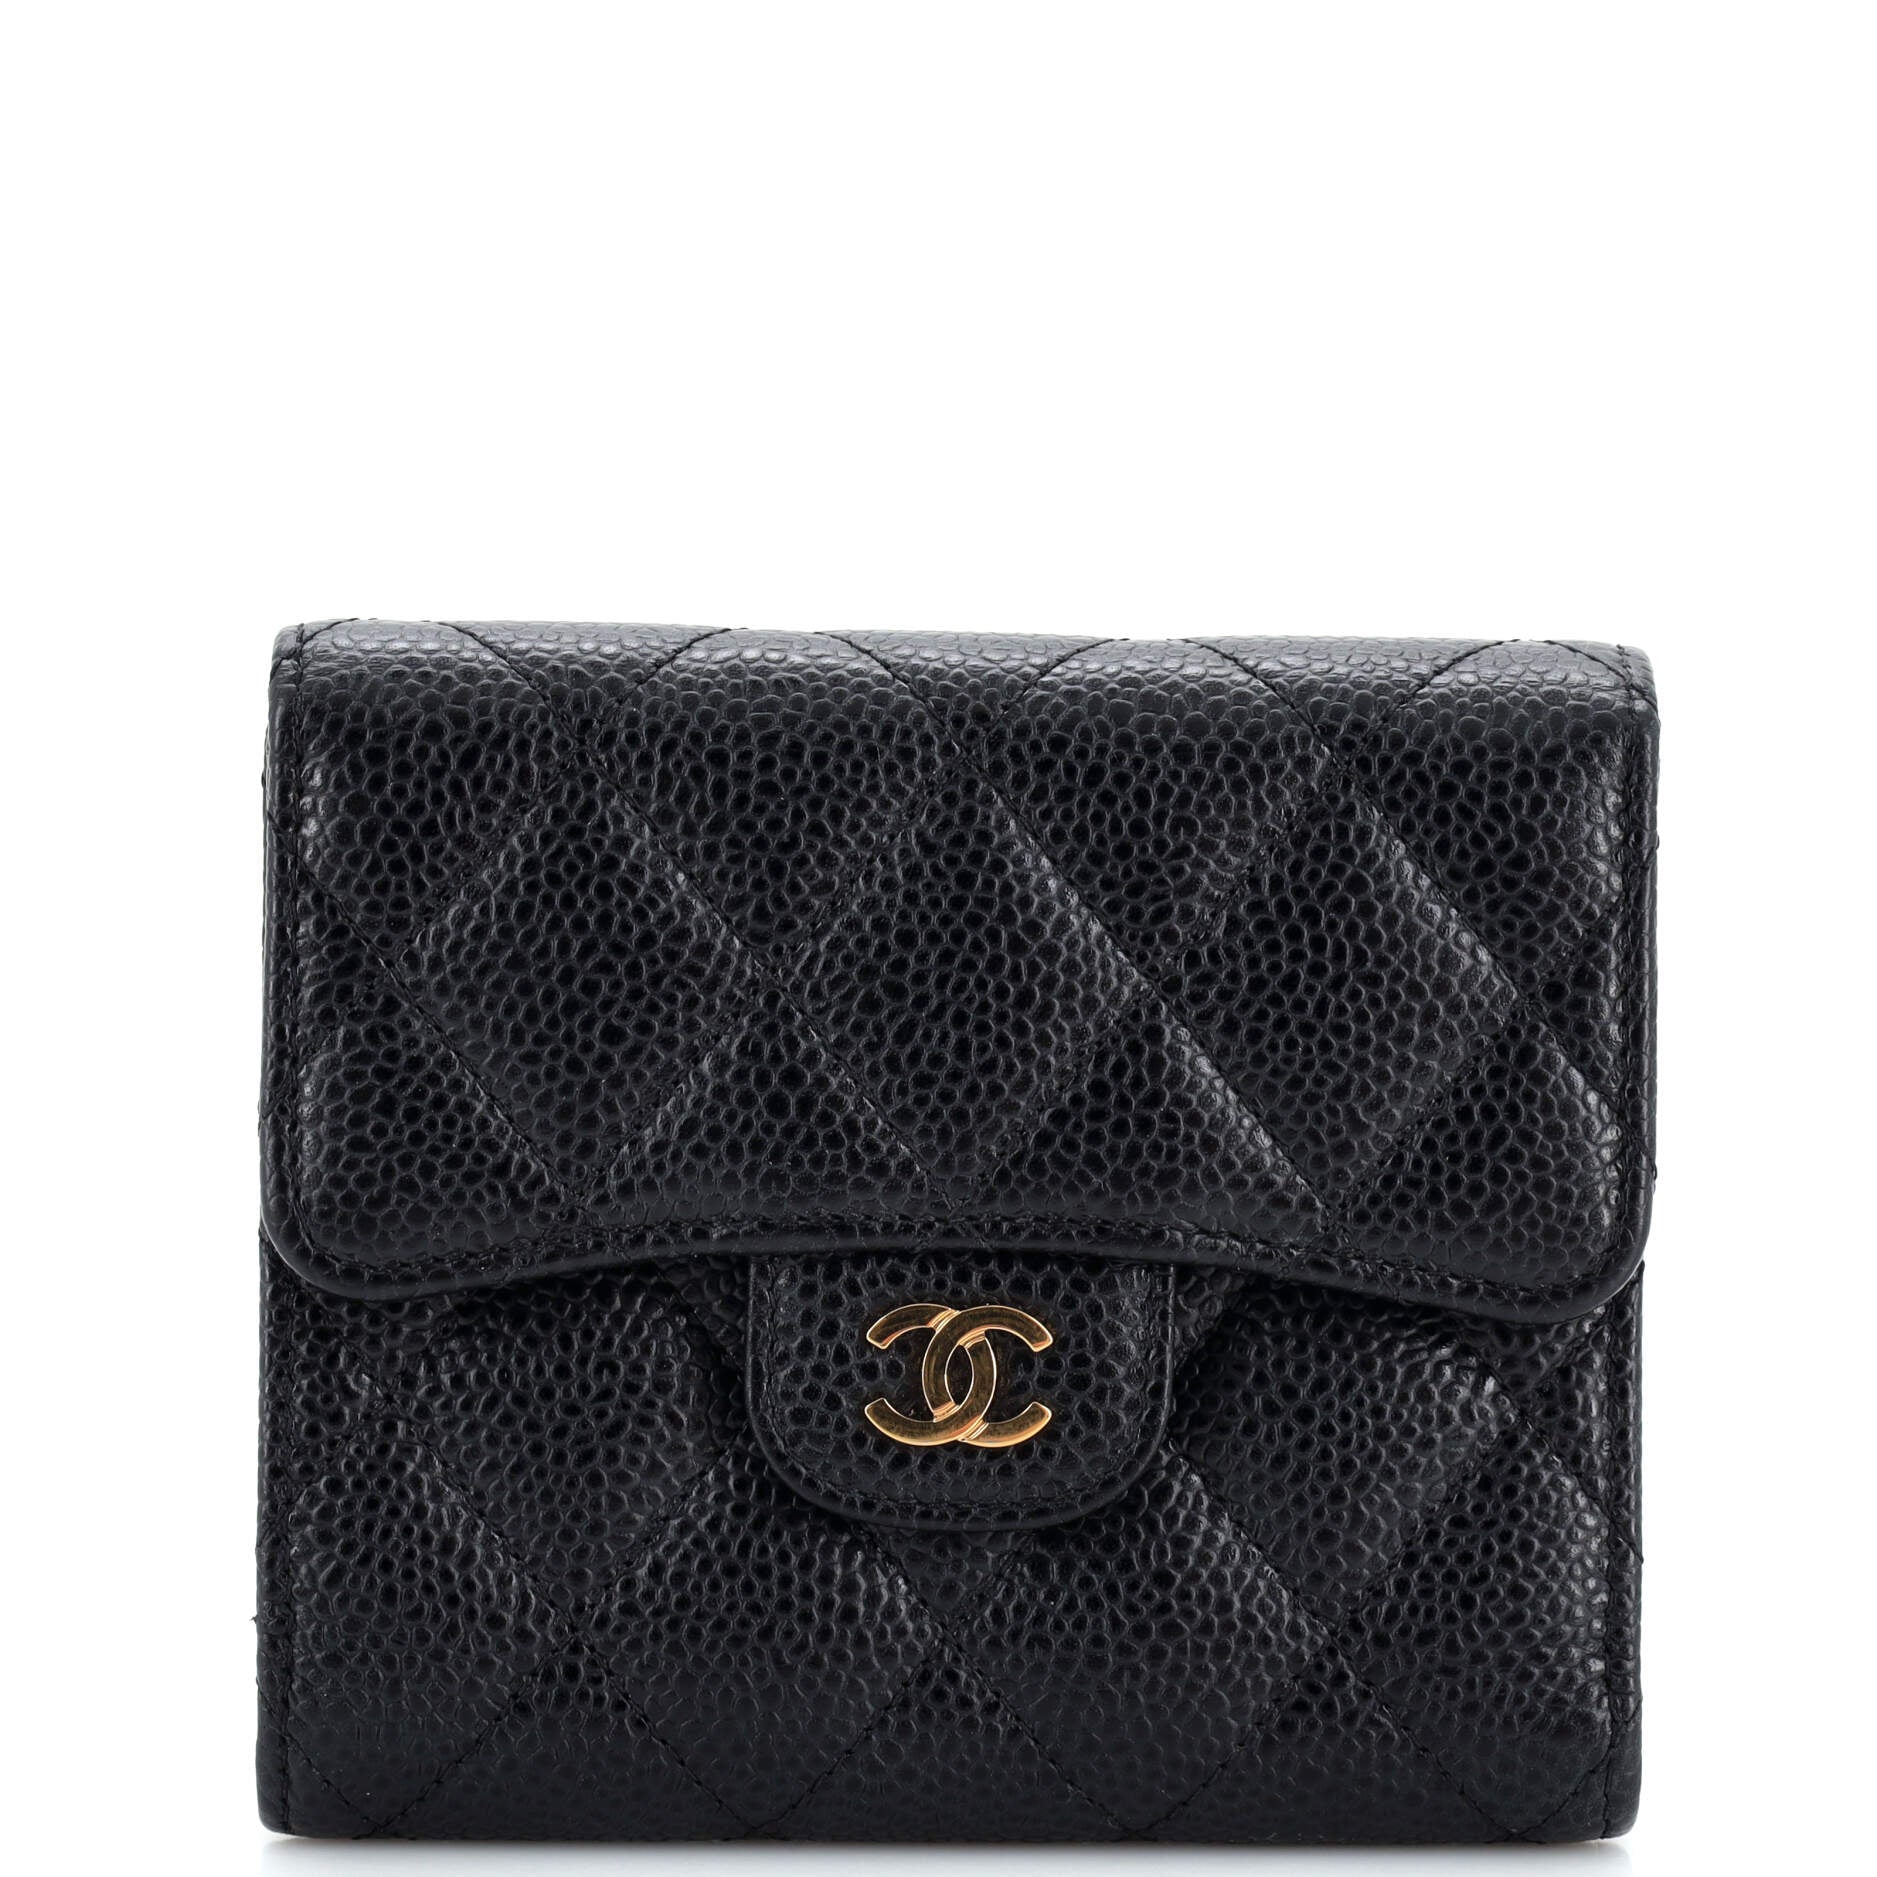 CC Compact Classic Flap Wallet Quilted Caviar